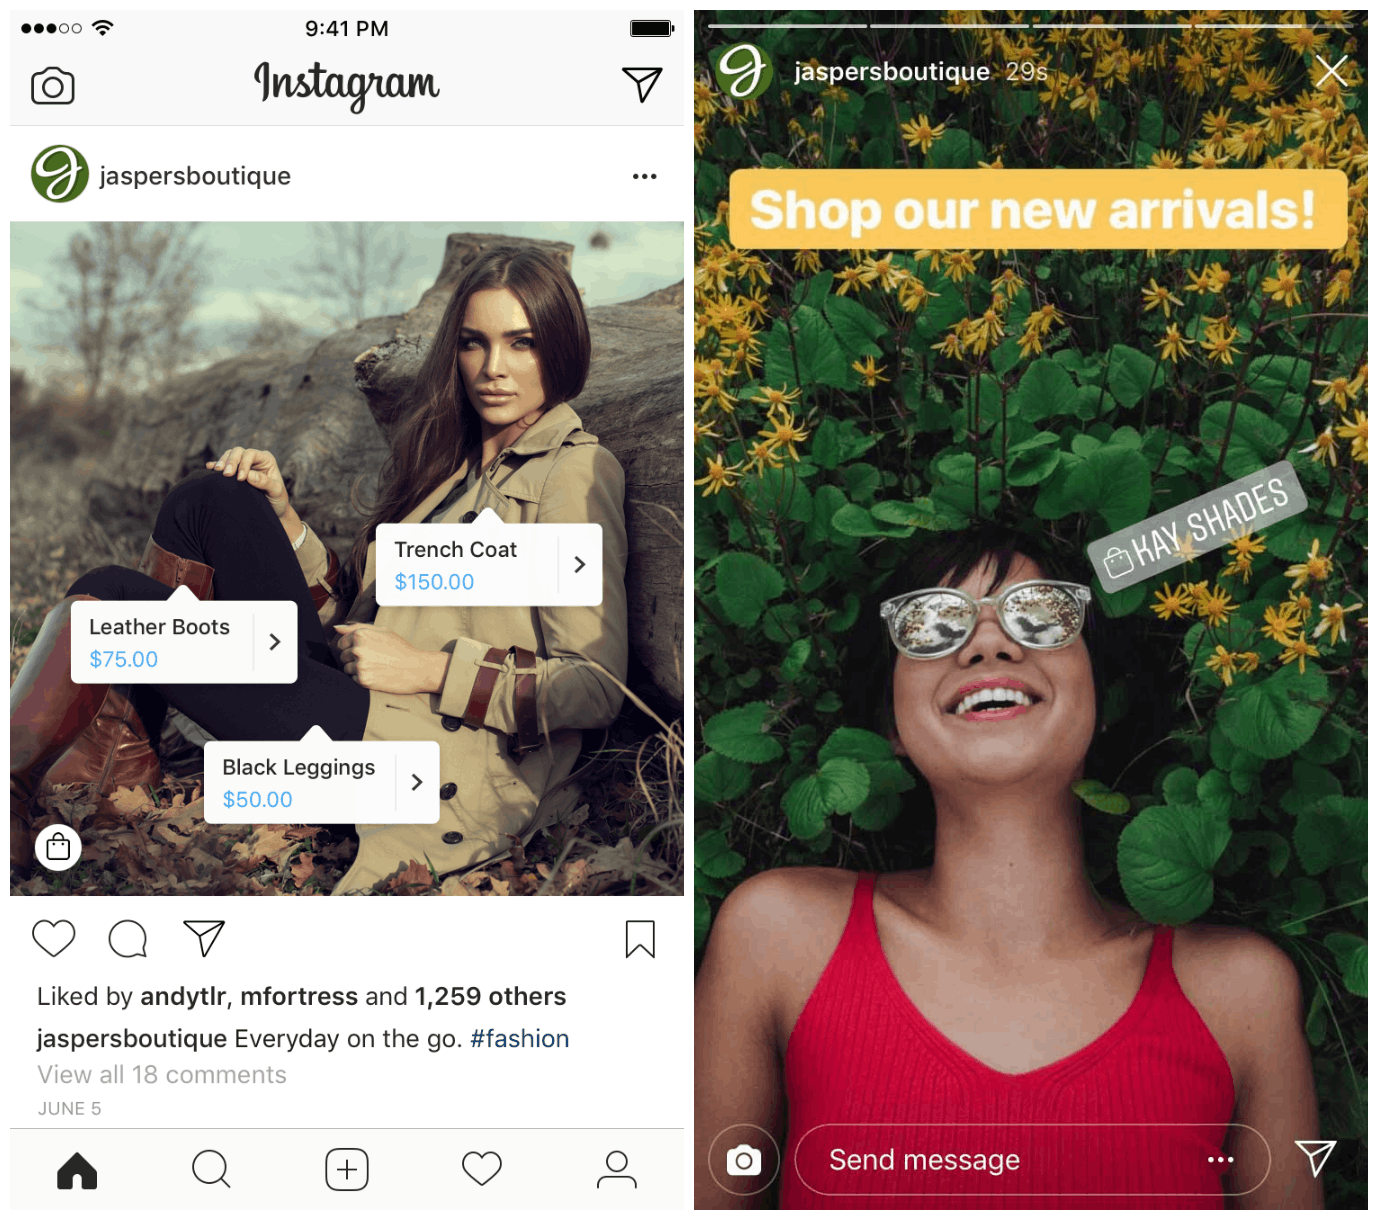 L to R: Shoppable tags are added in the form of product tags on image posts and stickers on IG Stories